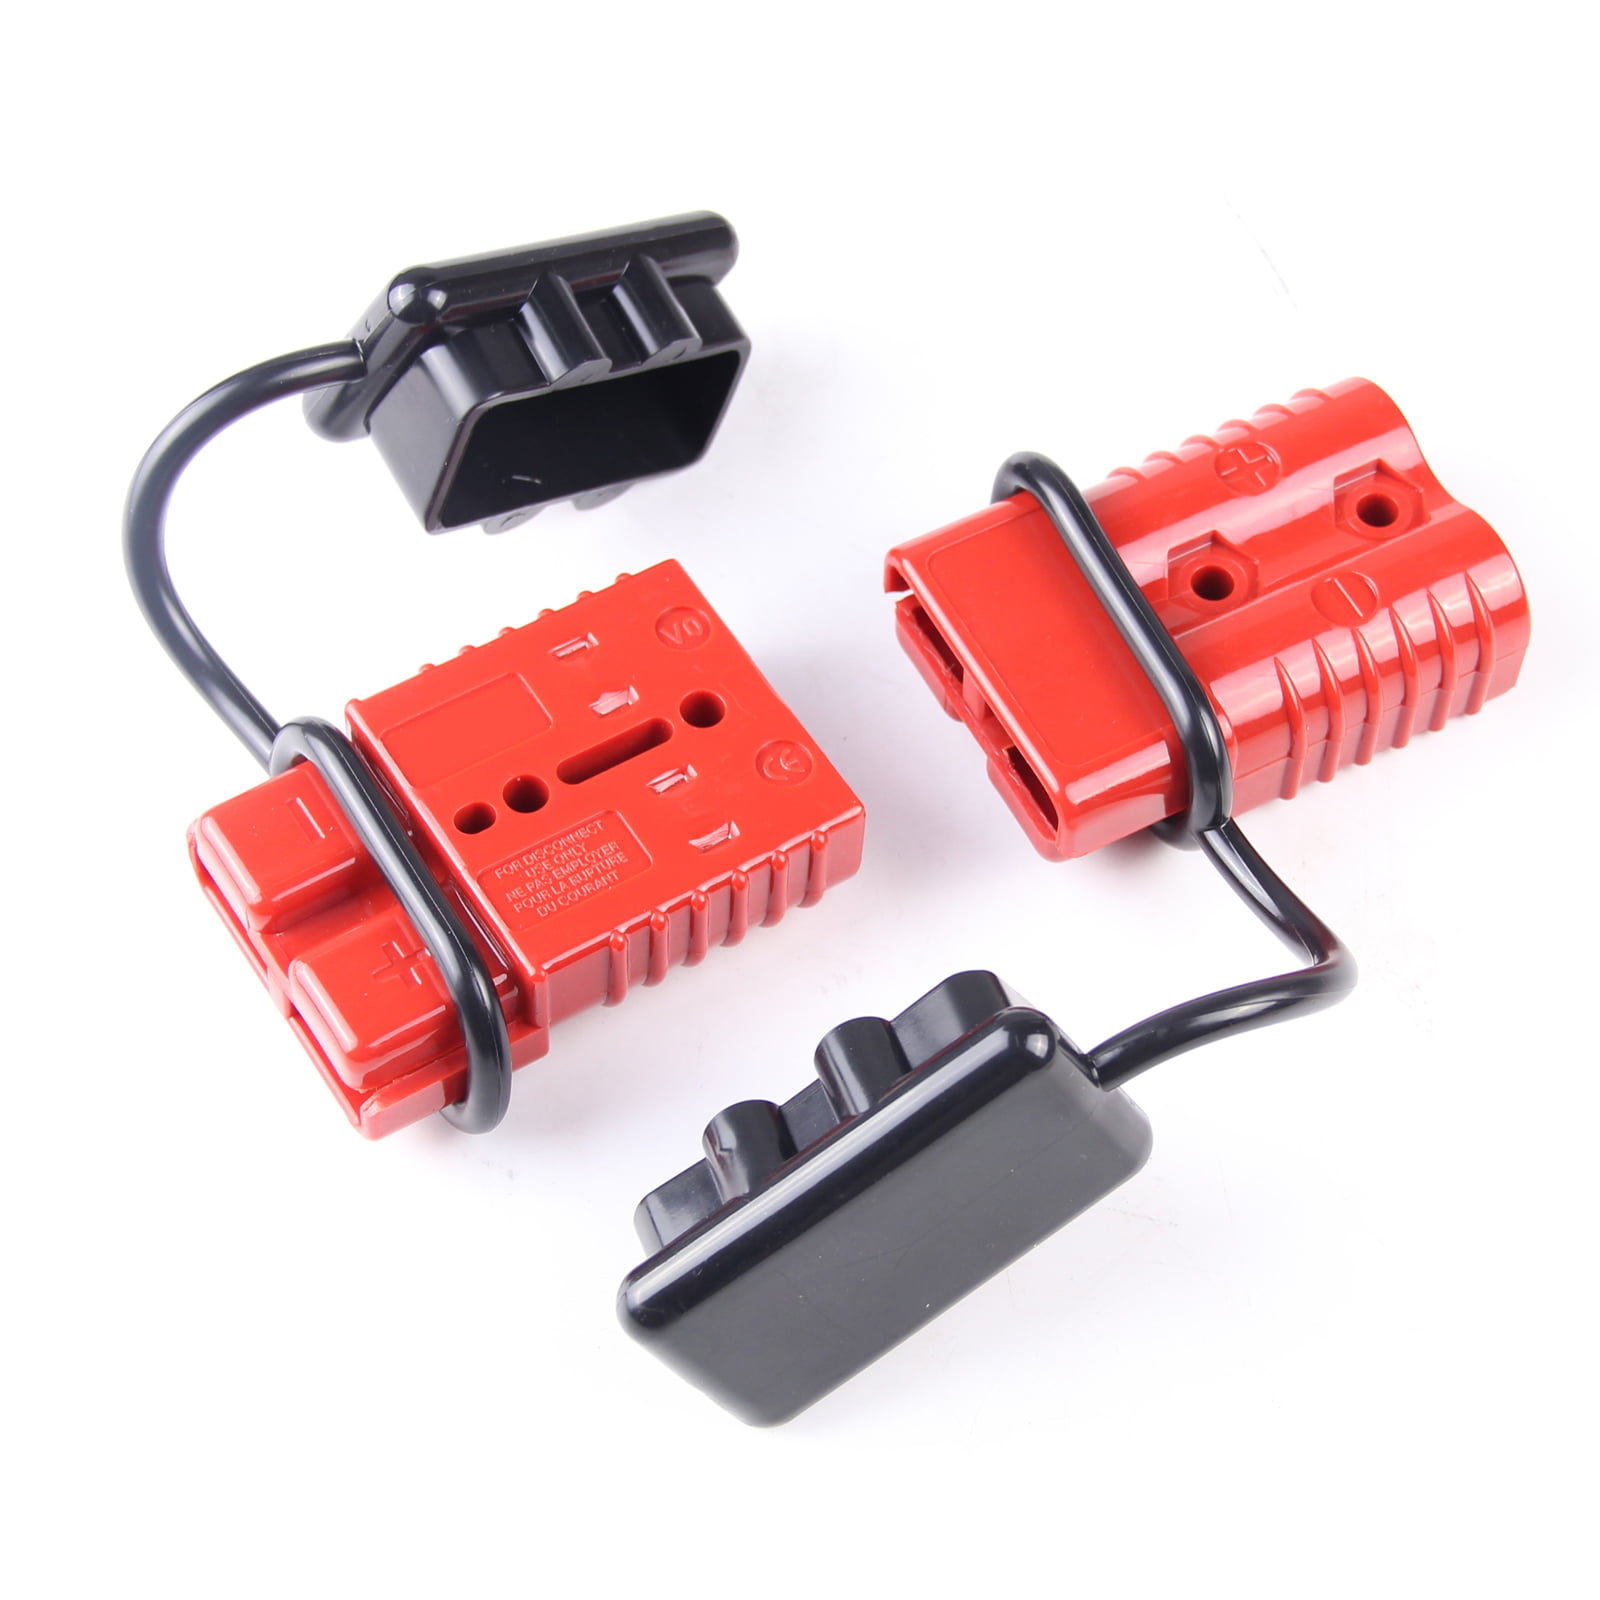 ANTS PART Universal 2-4 AWG 350A Battery Connect Quick Connector Plug for 12V Winch Trailer Driver Electrical Devices 